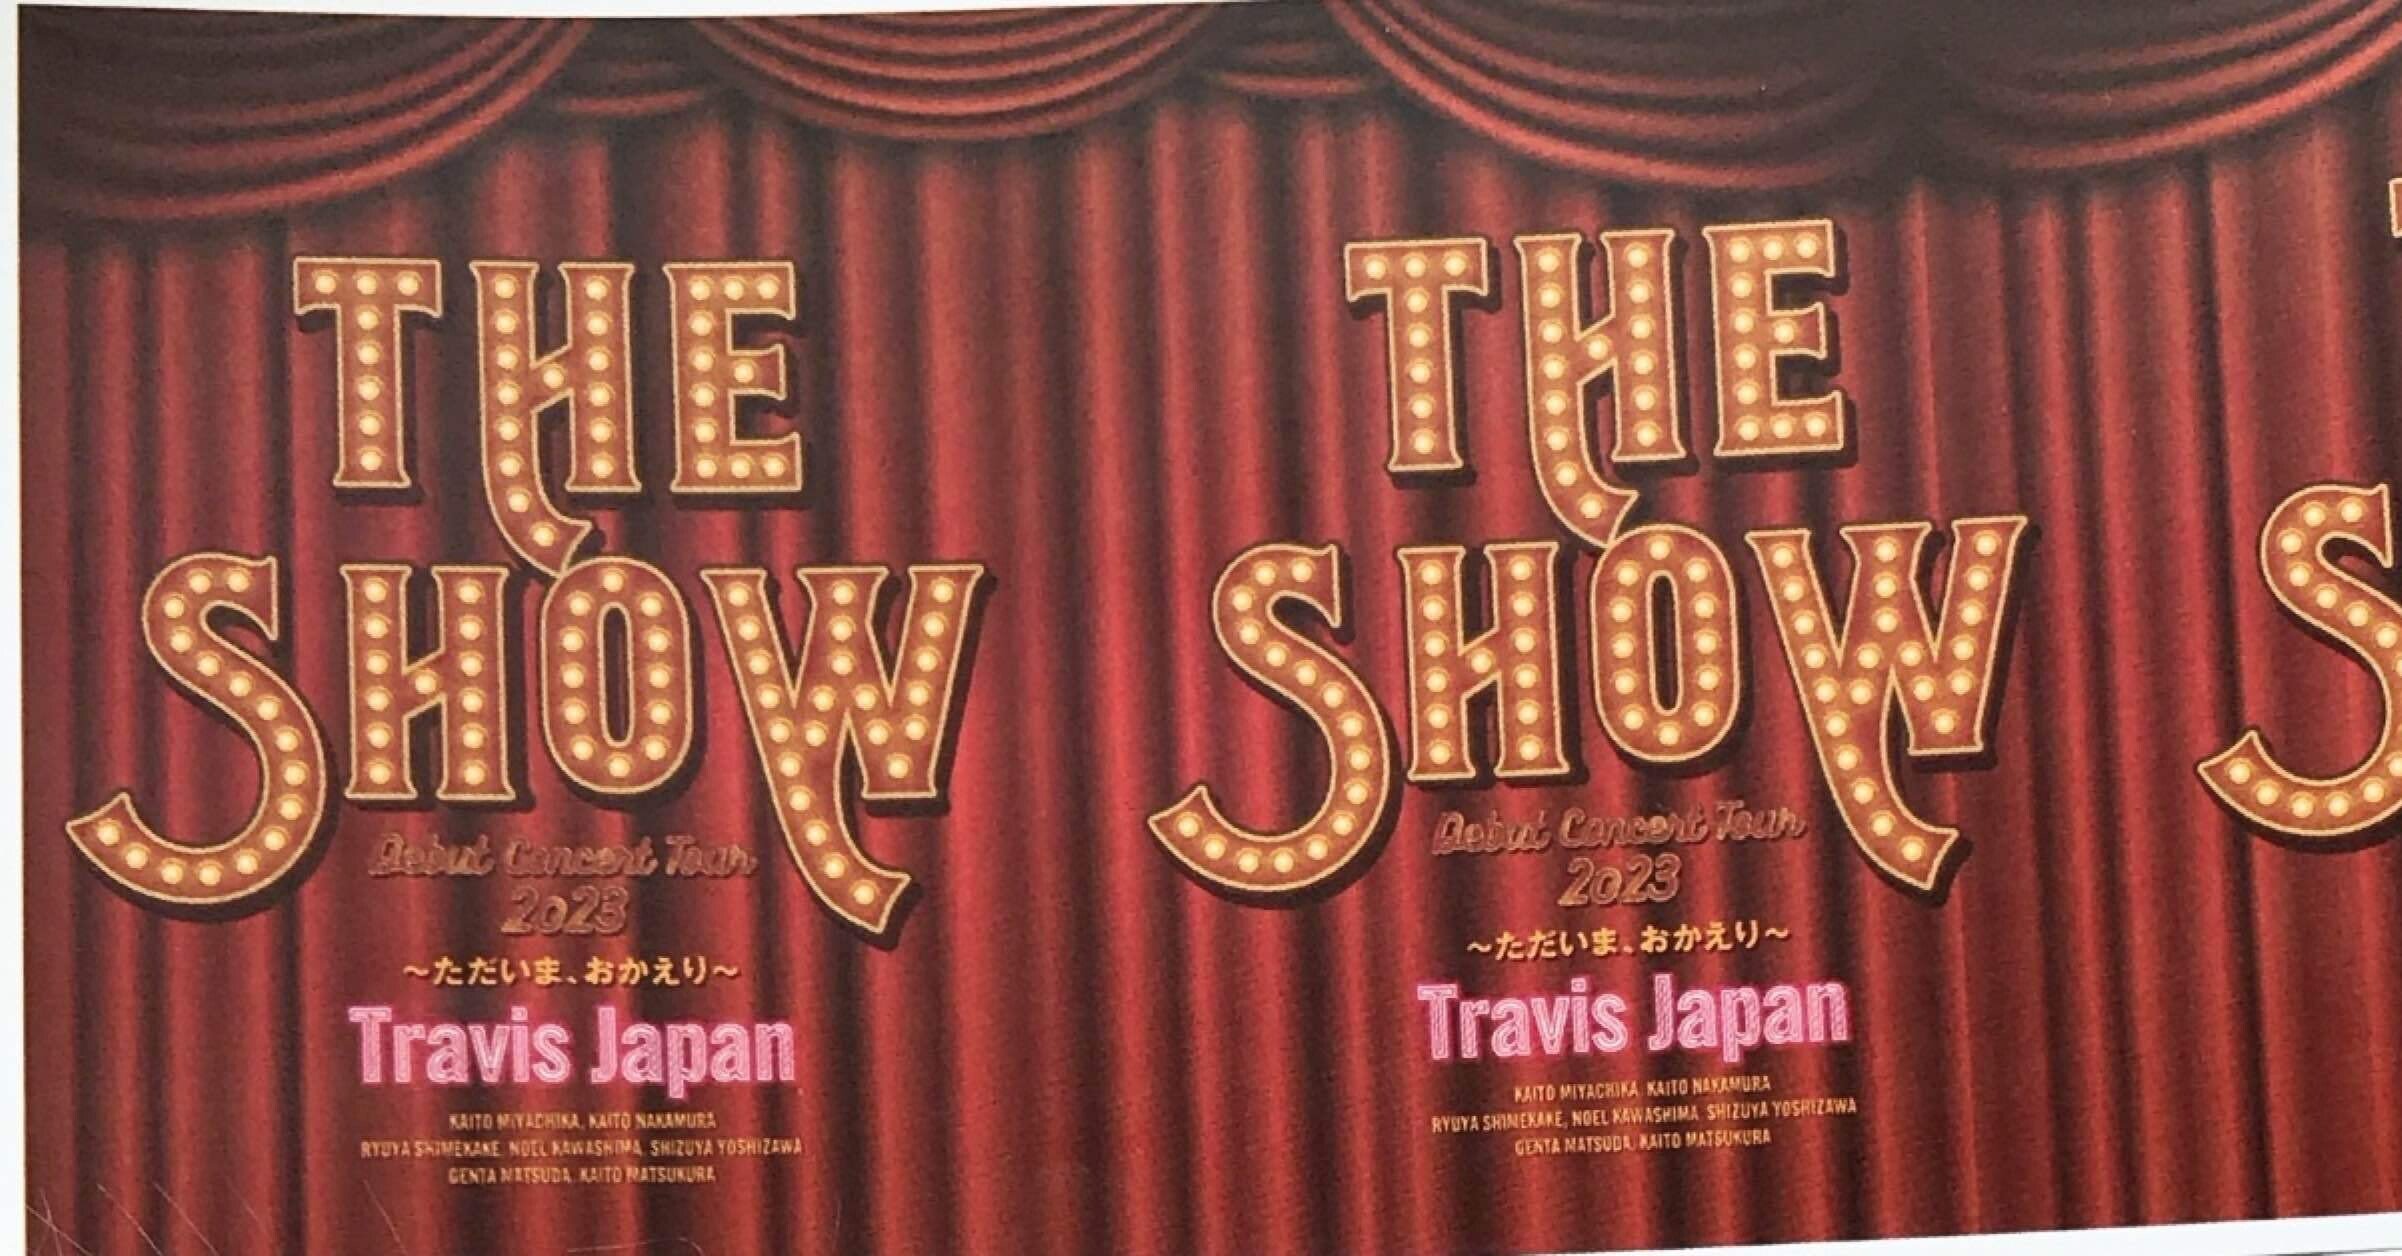 Travis Japan Debut Concert 2023 THE SHOW ～ただいま、おかえり